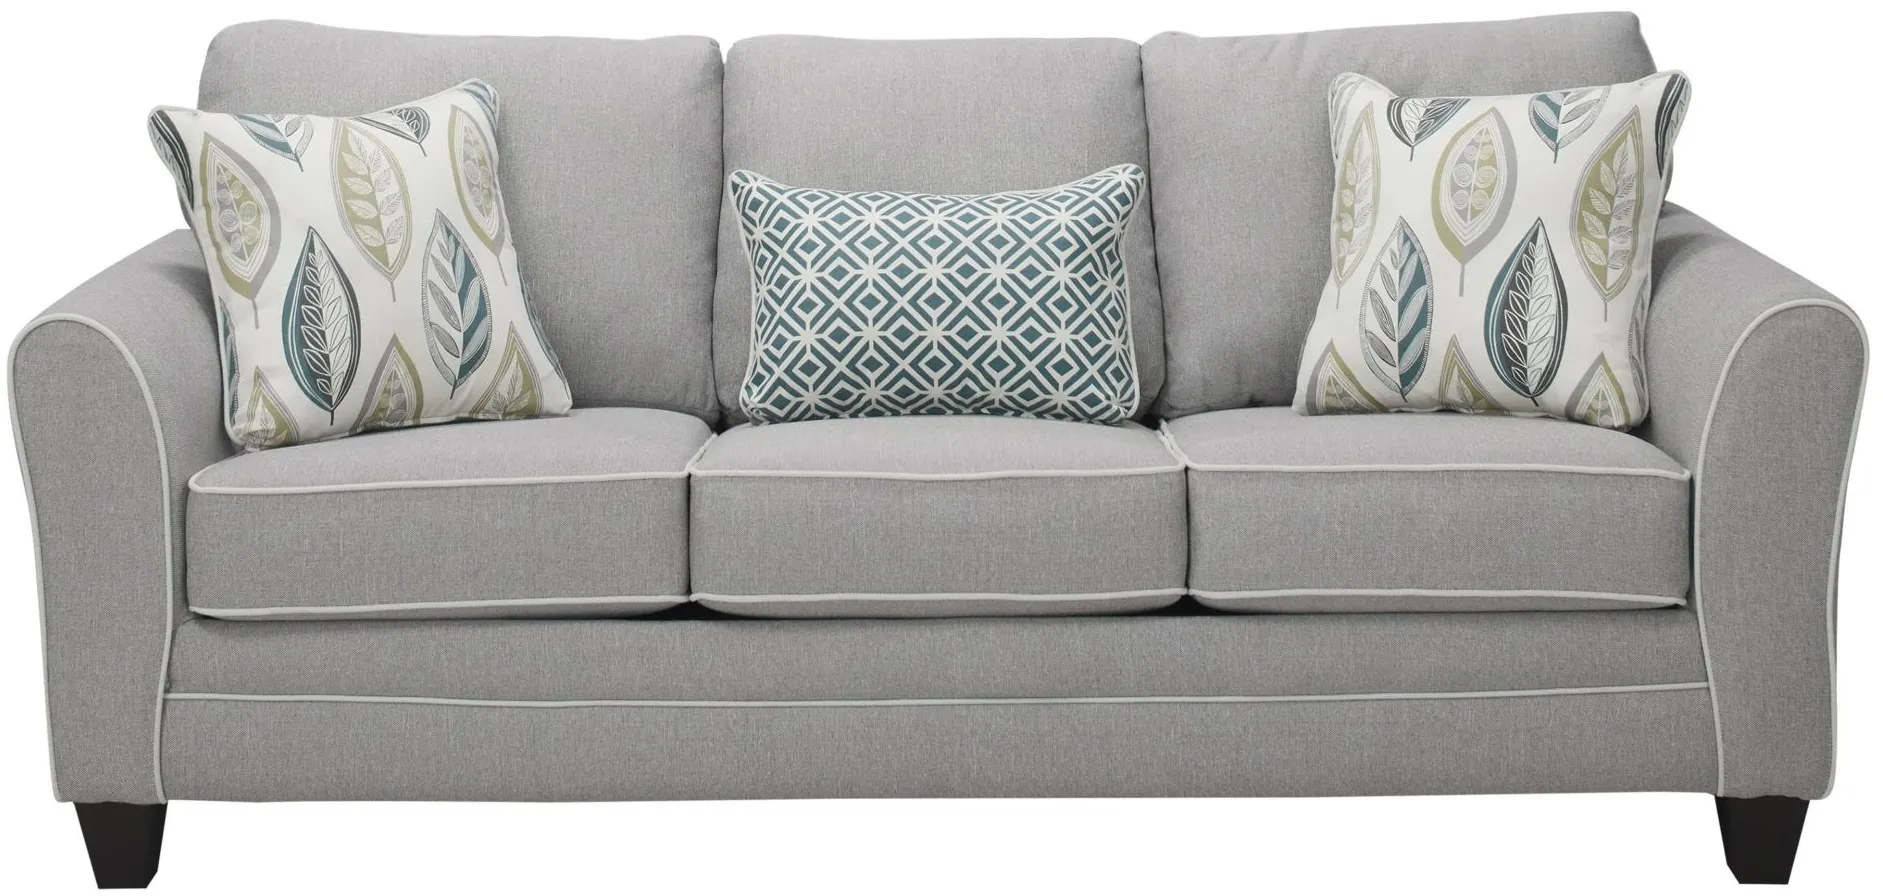 Bodey Sofa in Gray by Fusion Furniture